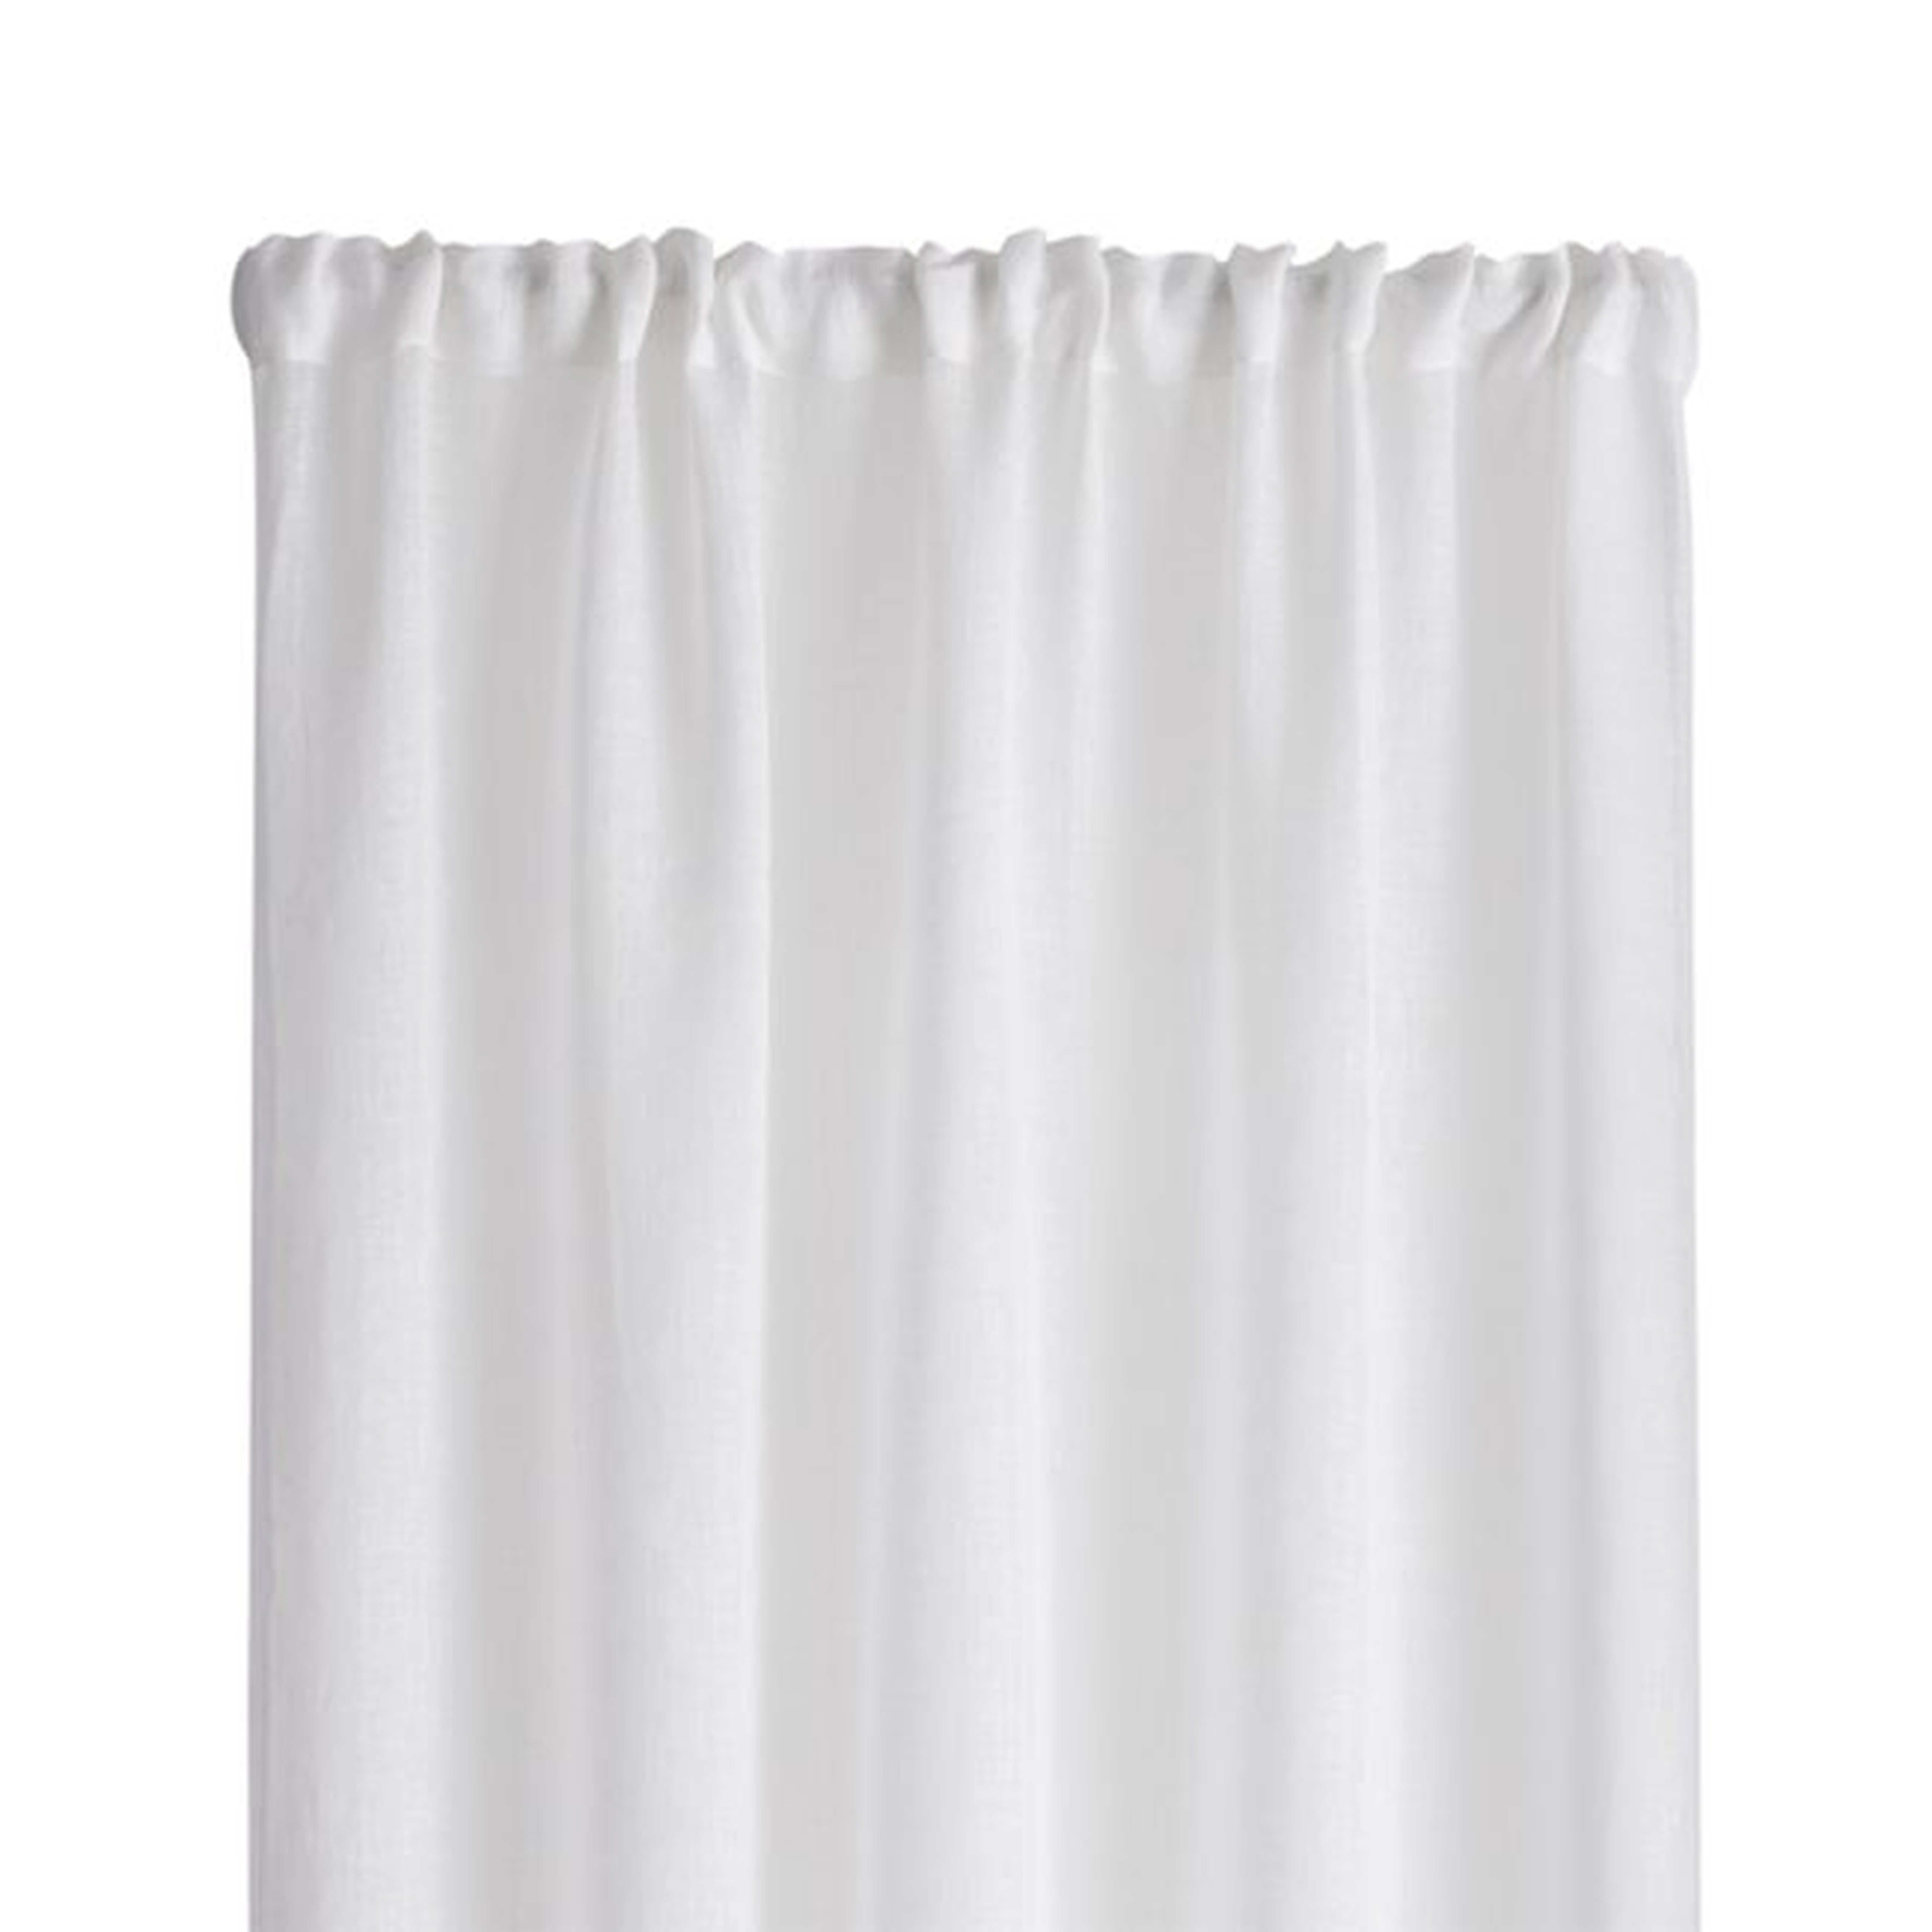 White Linen Sheer 52"x120" Curtain Panel - Crate and Barrel